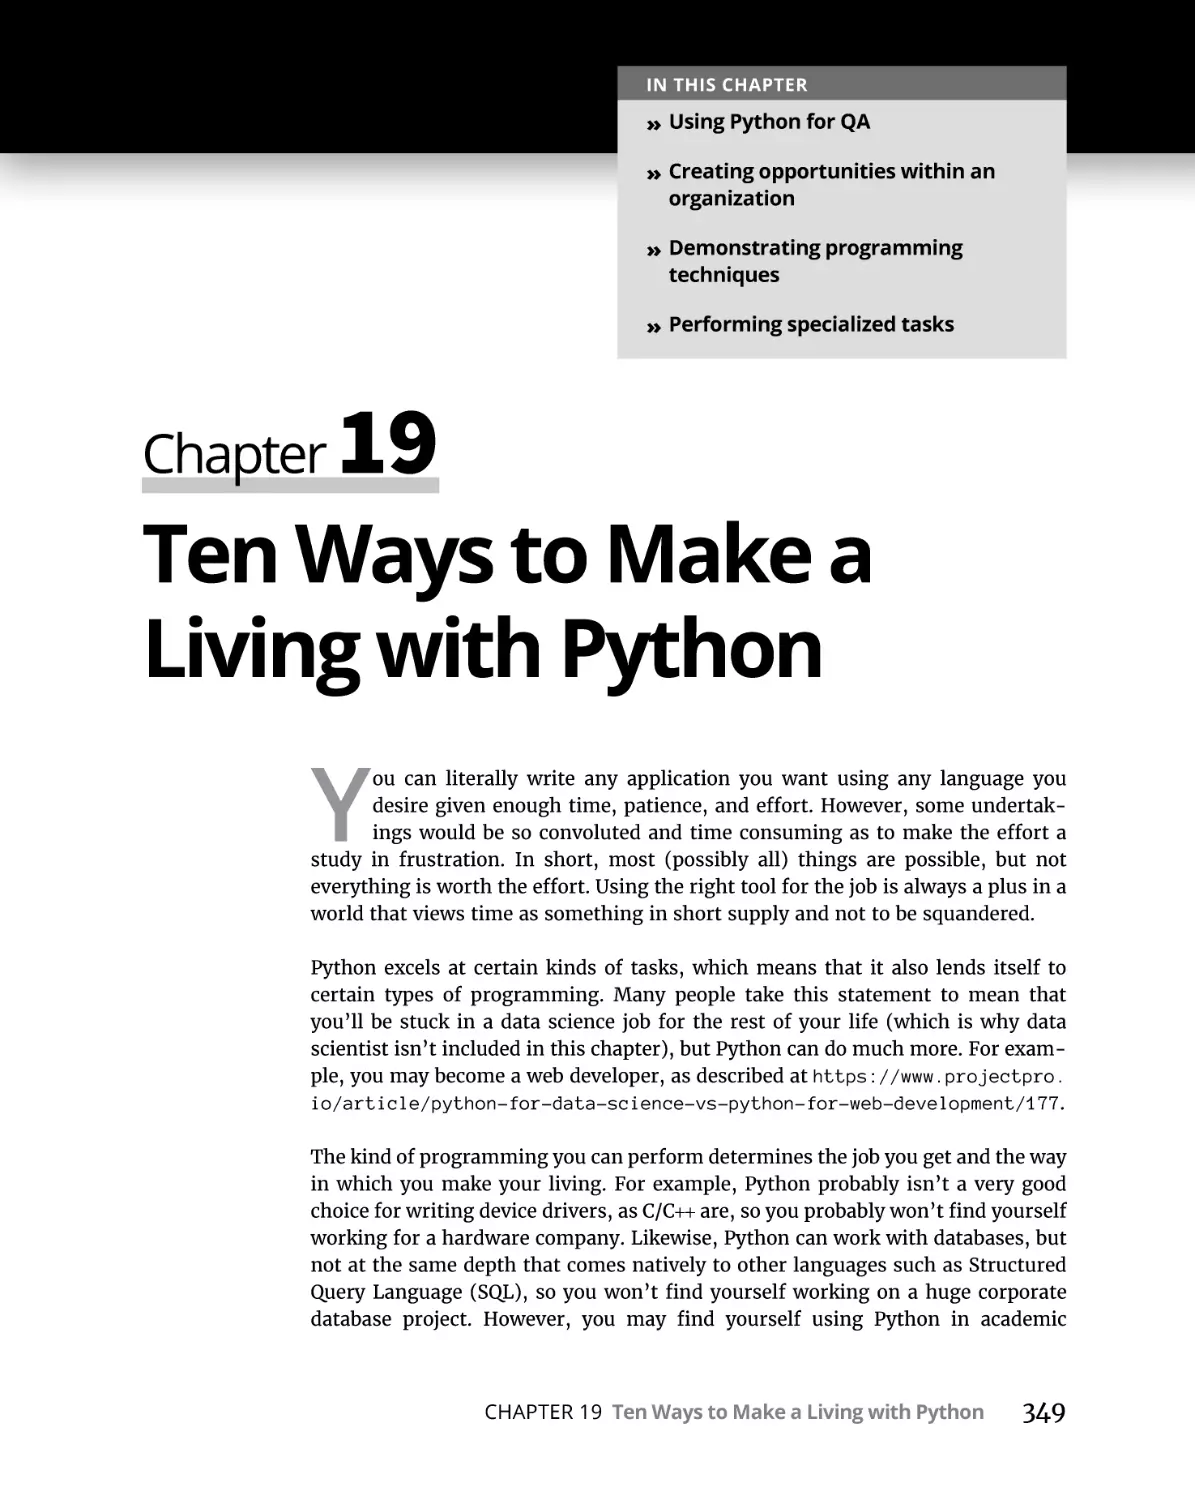 Chapter 19 Ten Ways to Make a Living with Python